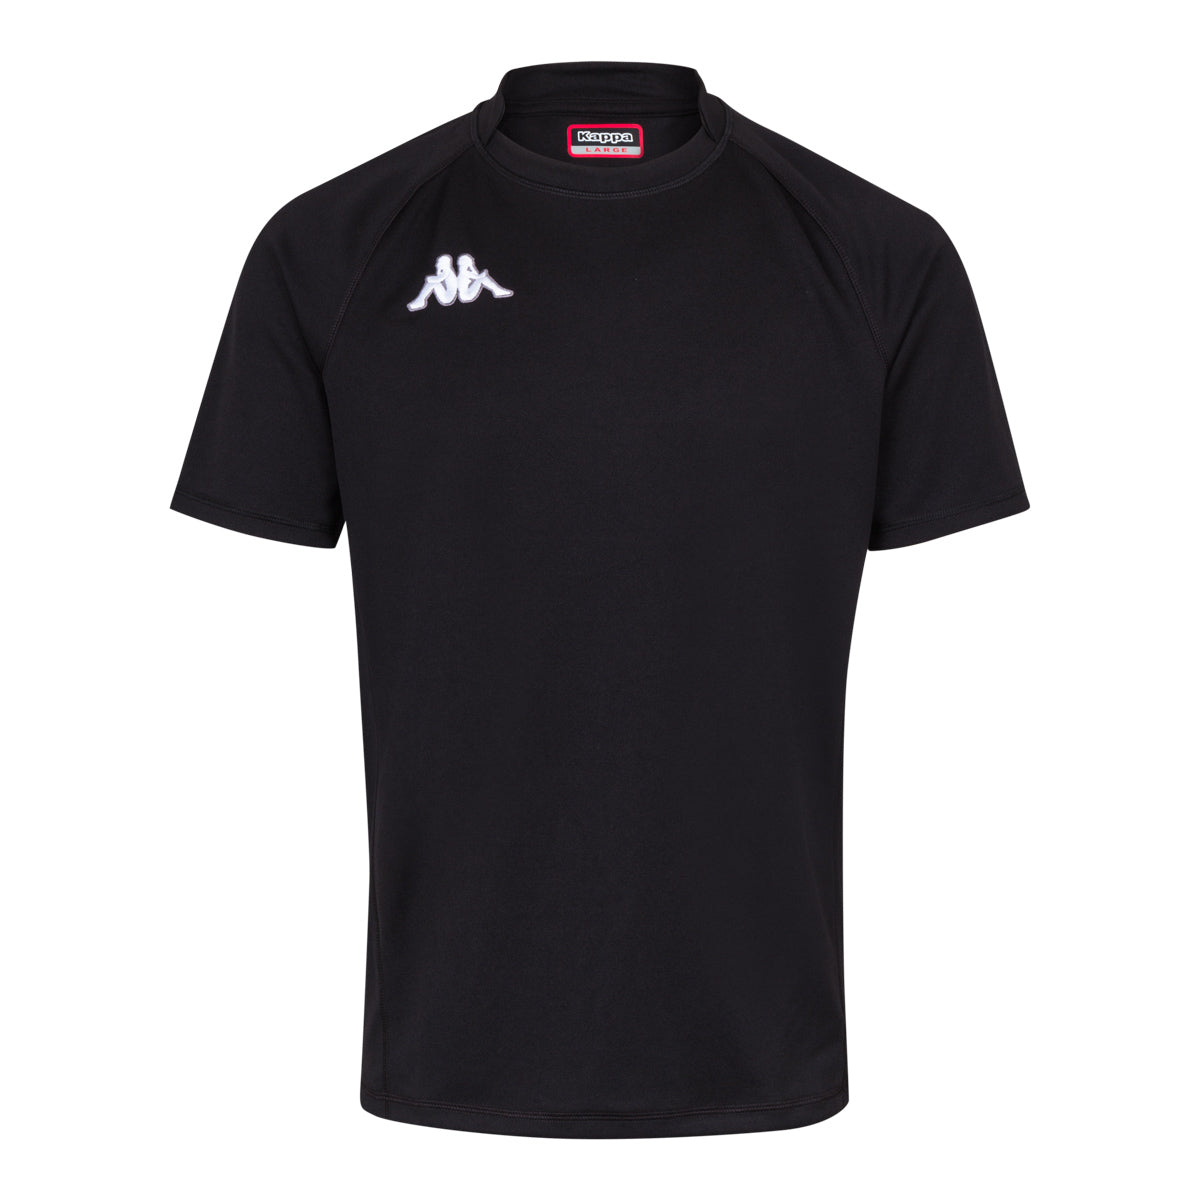 Maillot Rugby Telese Noir Homme - Image 1